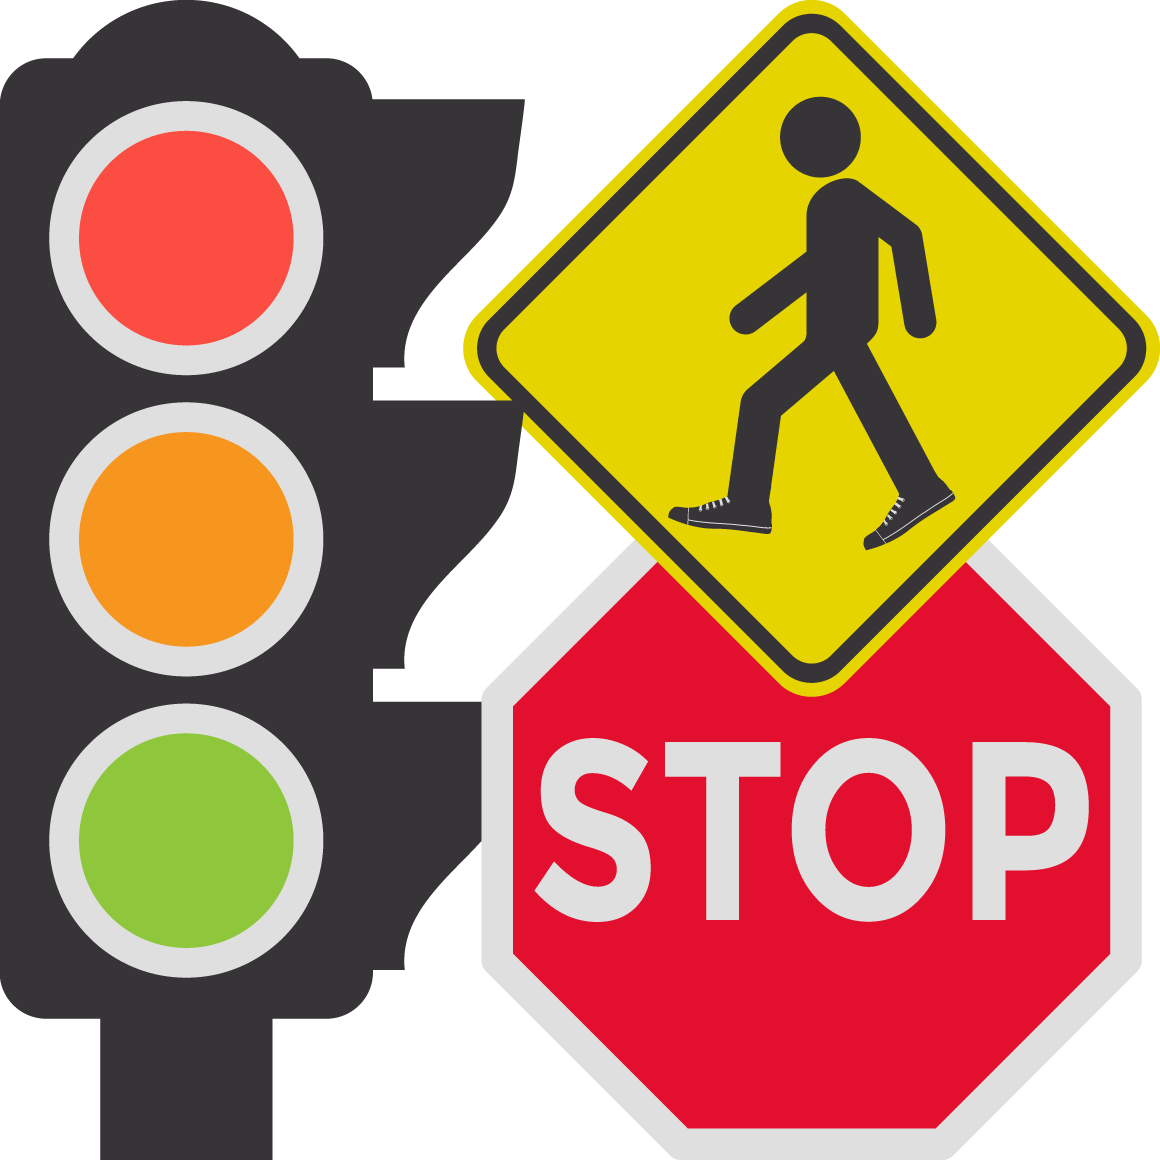 Image for boston by bike riding tips stop sign, traffic light, yield sign rules of the road